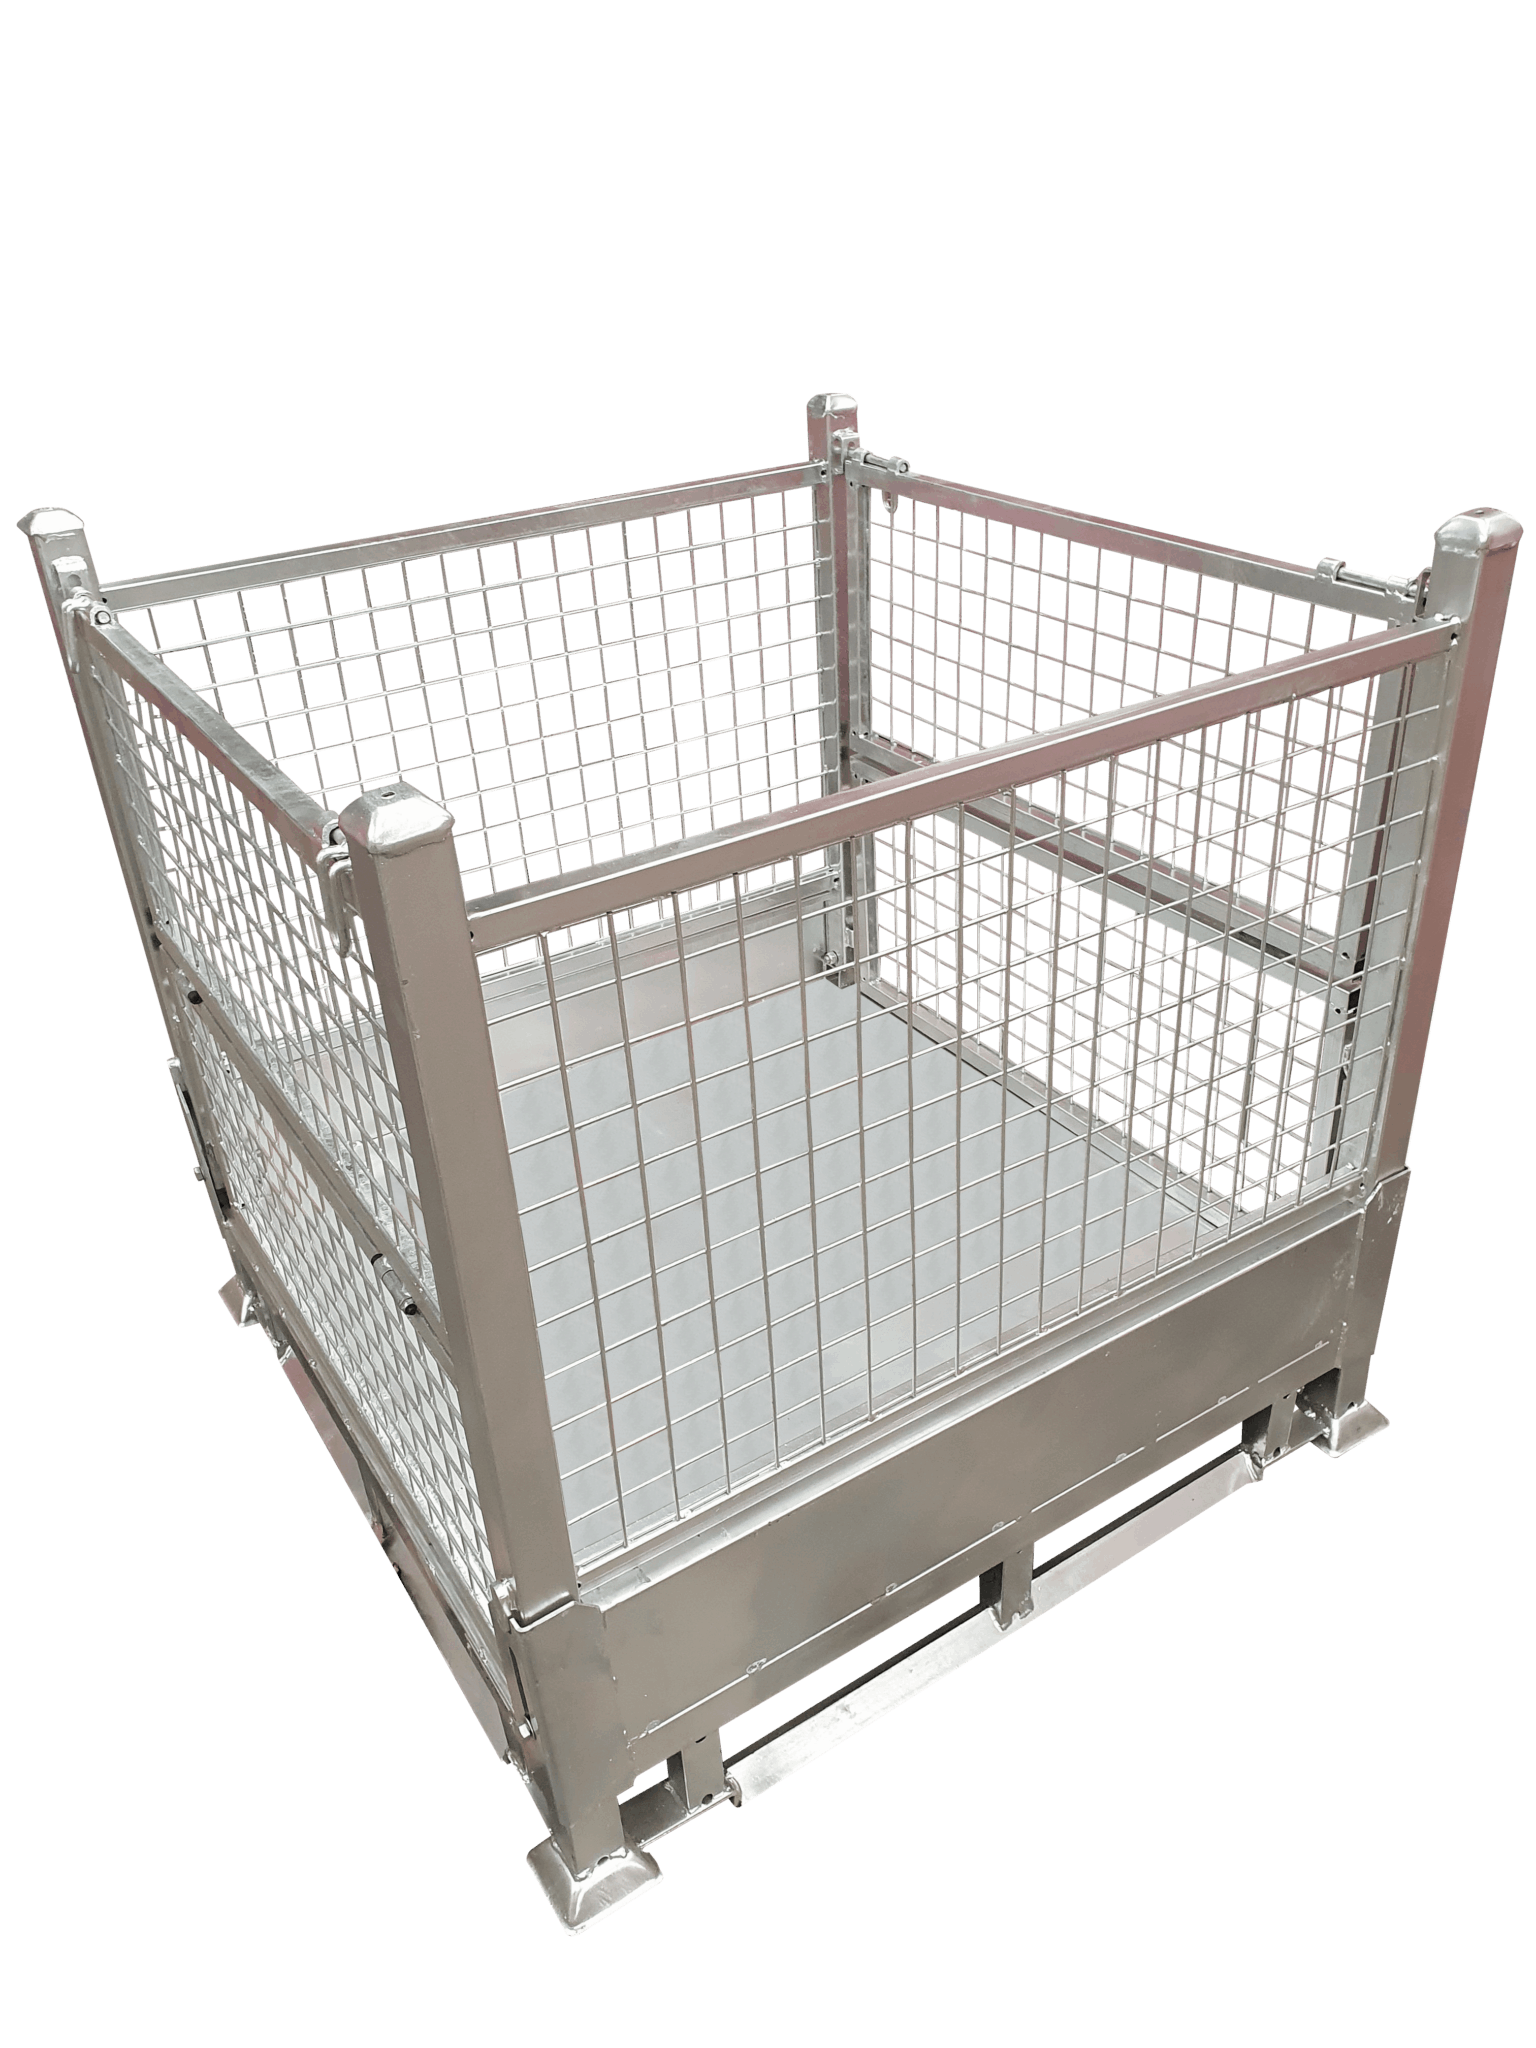 Rated and Engineered Steel Cages | DAYWALK